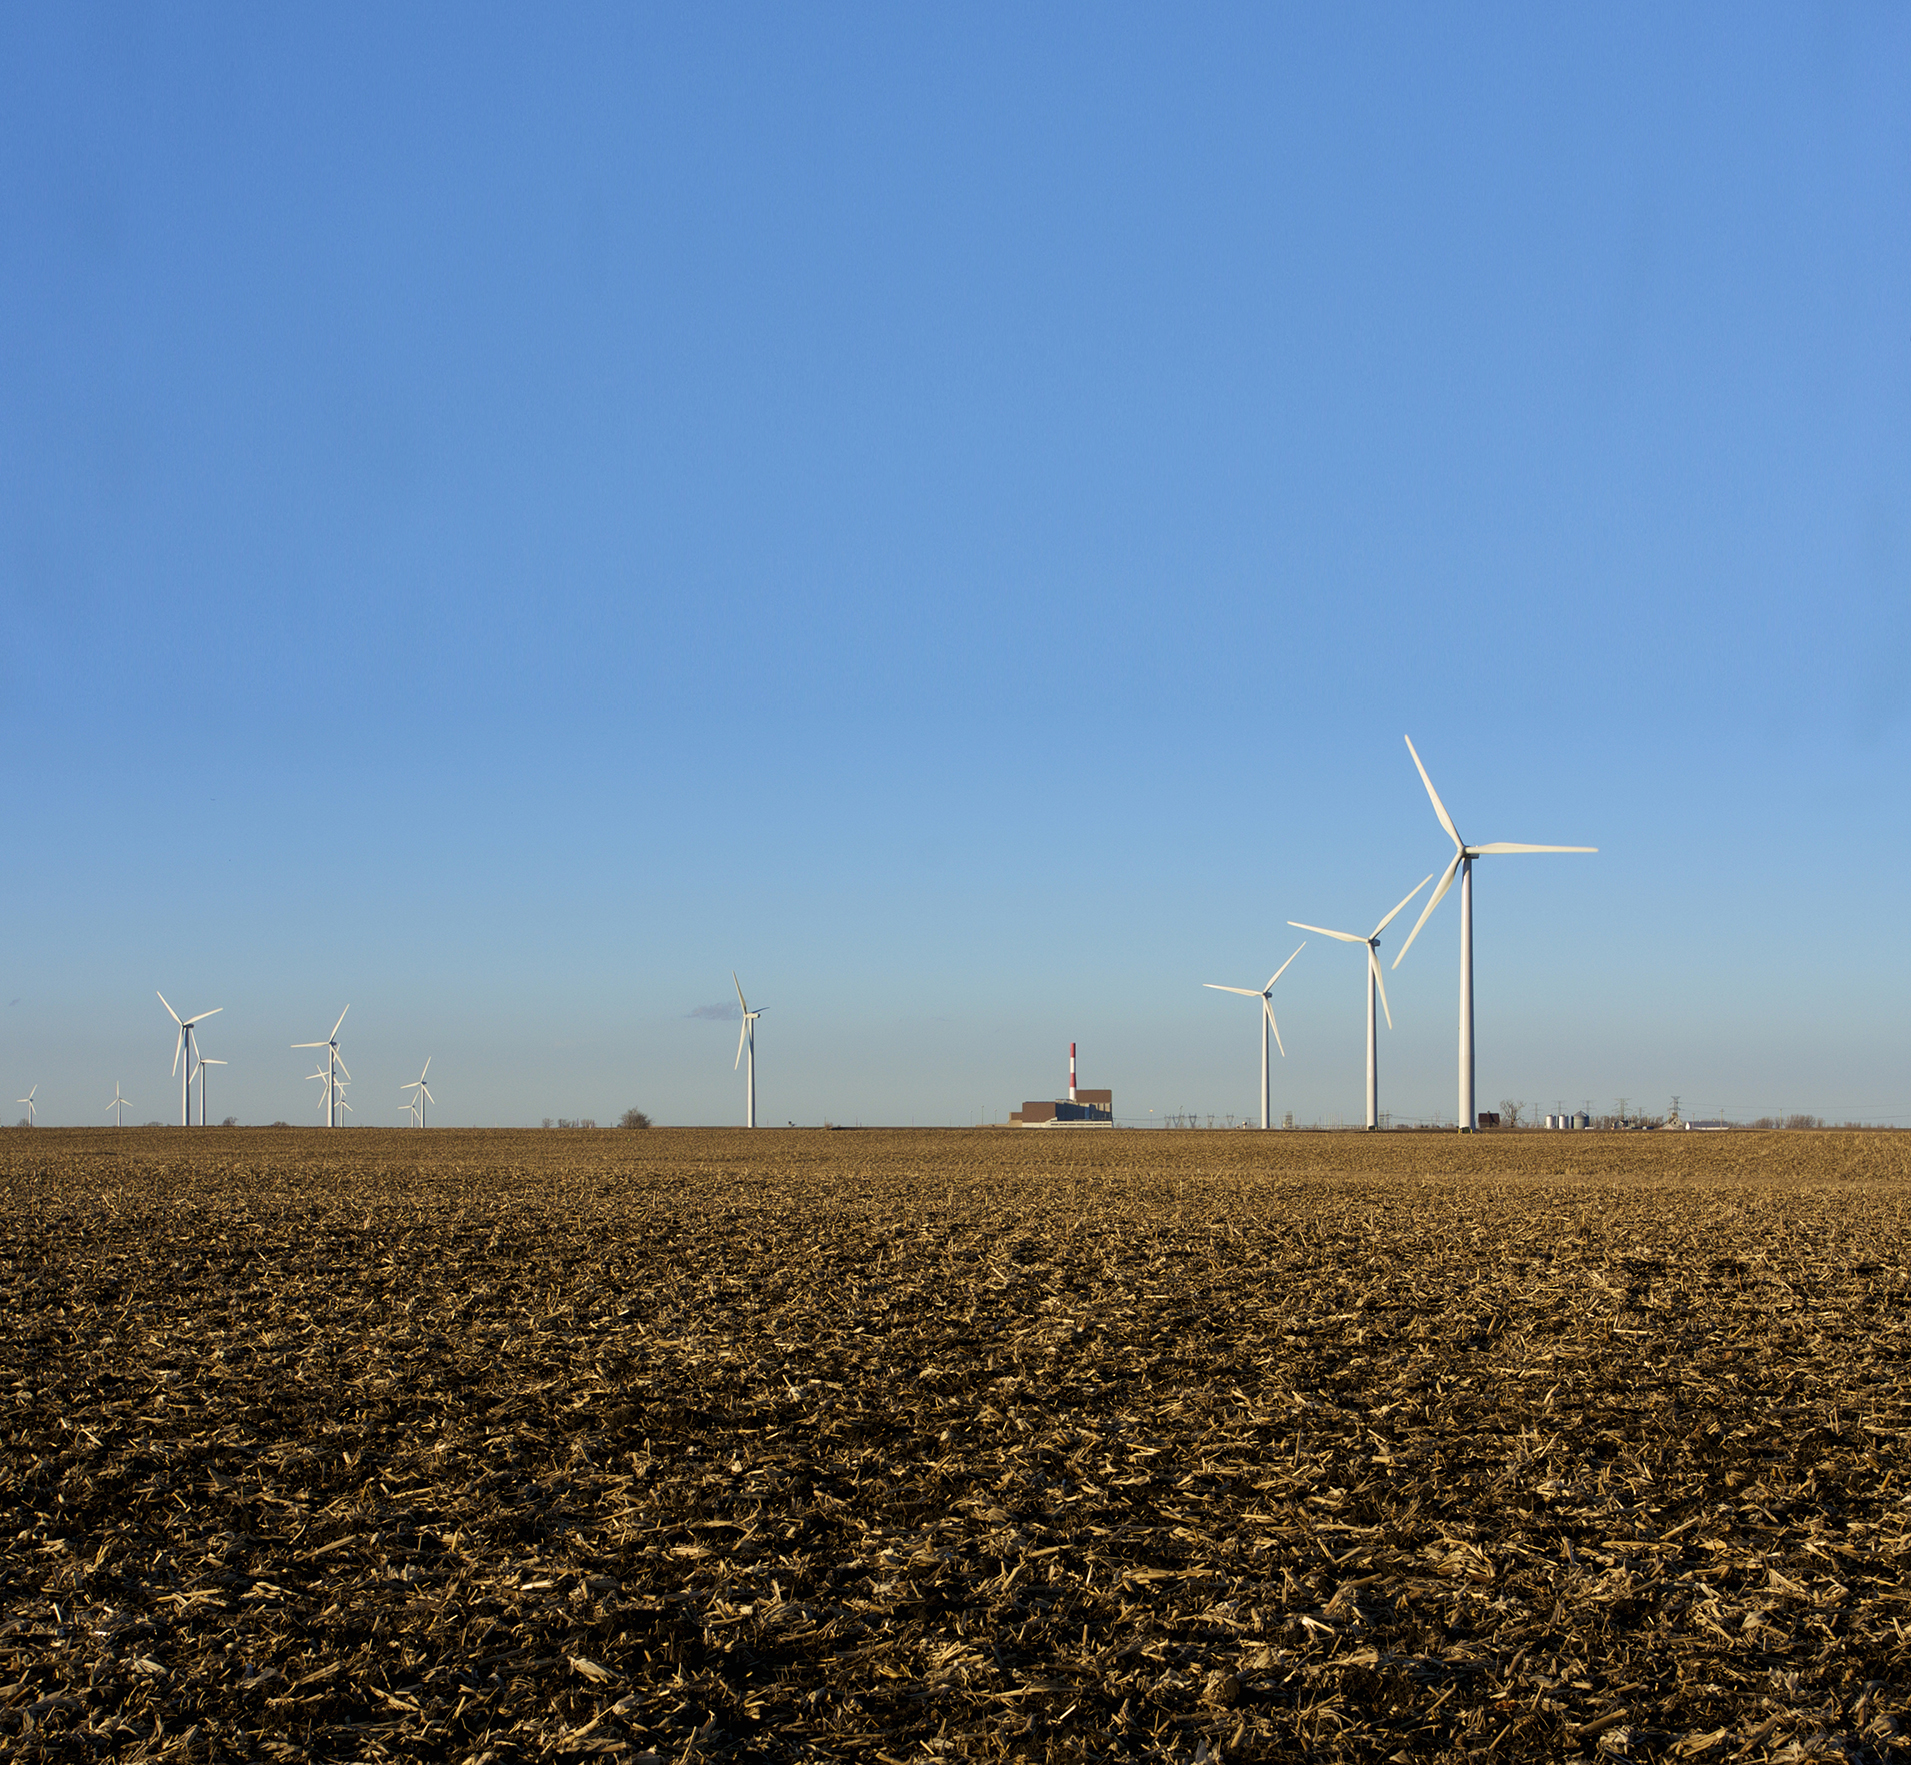 Photo of windmill towers in a farm field with a power plant in the background